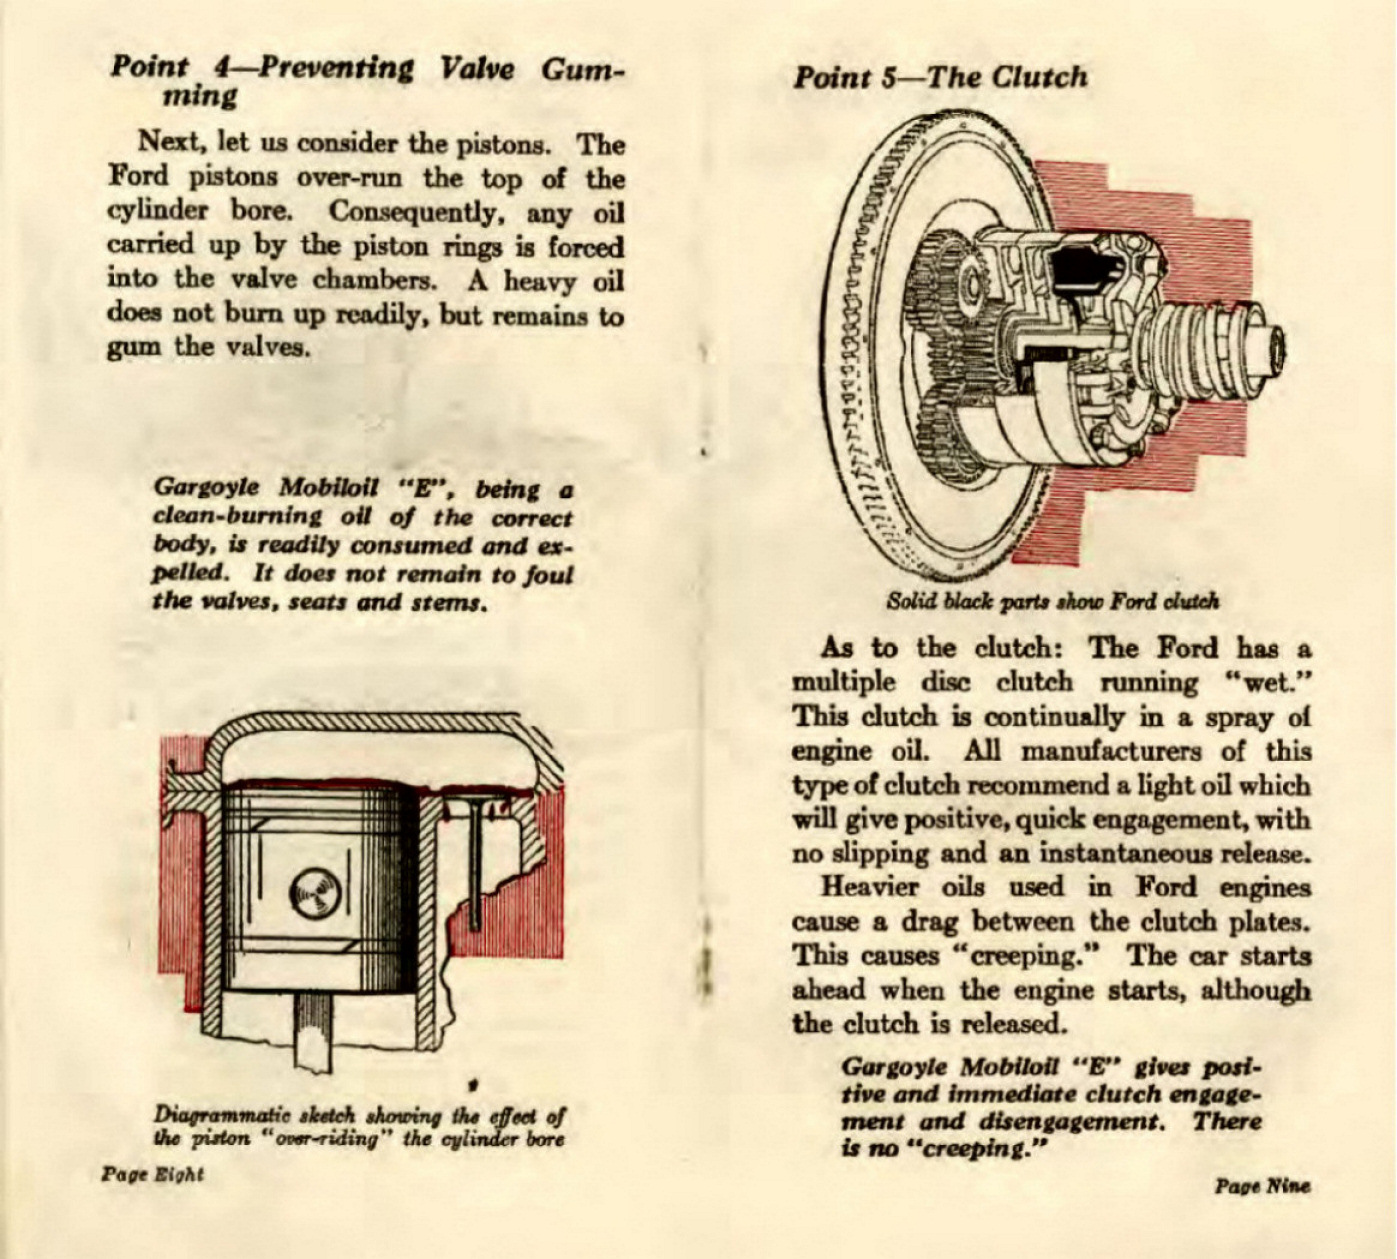 1923_Ford_Lube_Booklet-08-09